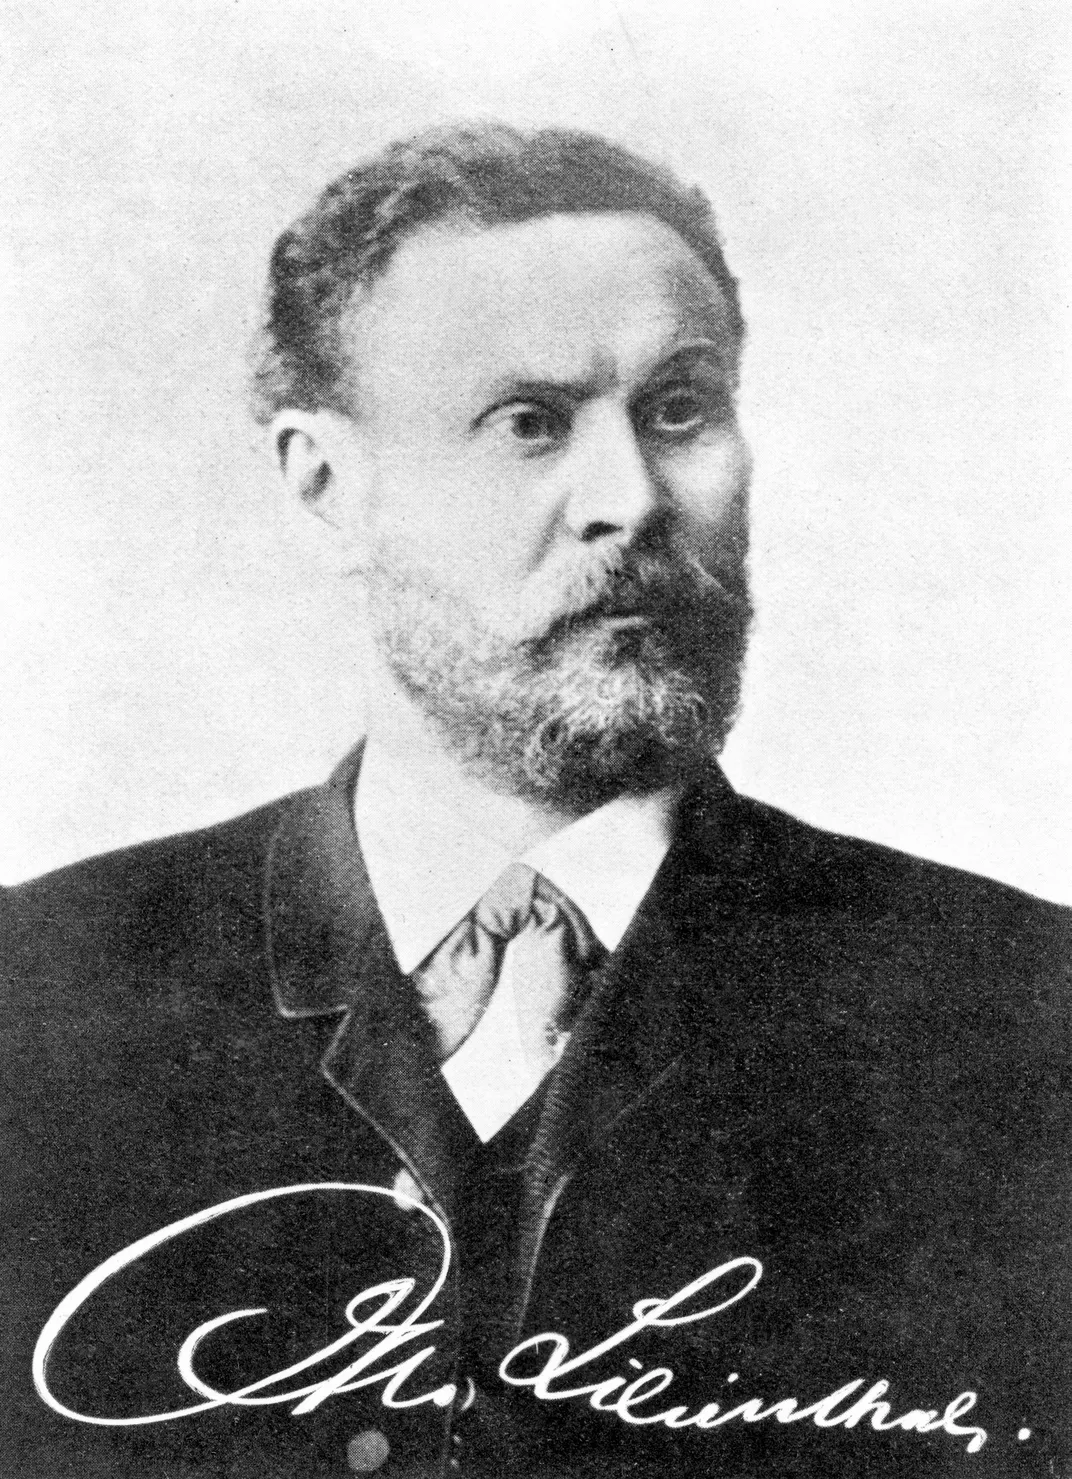 Signed portrait of Otto Lilienthal